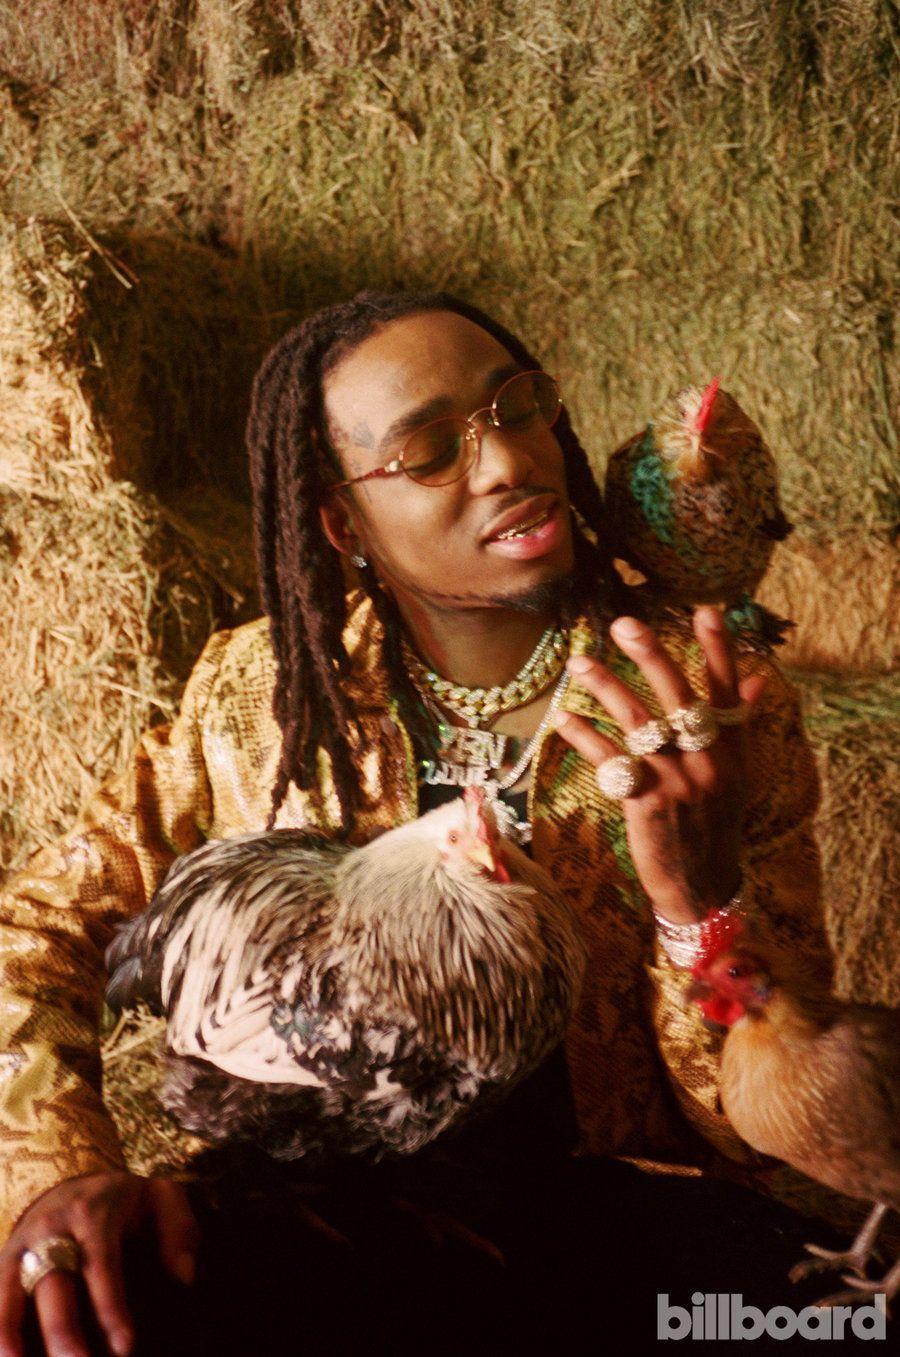 Migos: Photo From The Billboard Cover Shoot